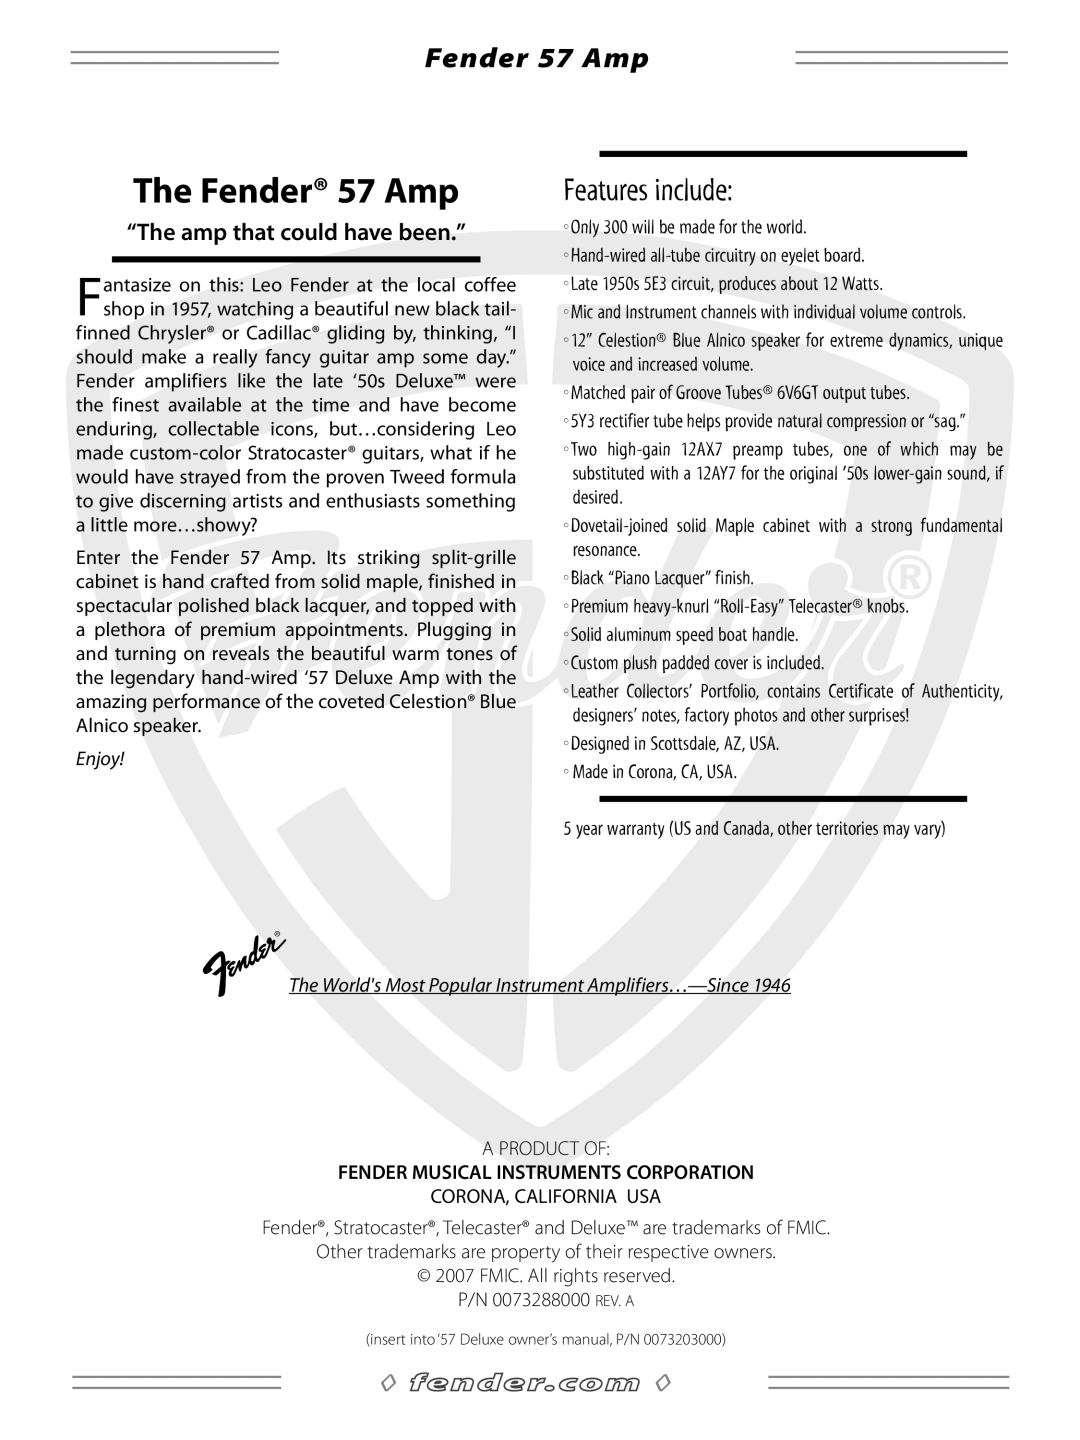 Fender owner manual Enjoy, The Worlds Most Popular Instrument Amplifiers…-Since, The Fender 57 Amp 